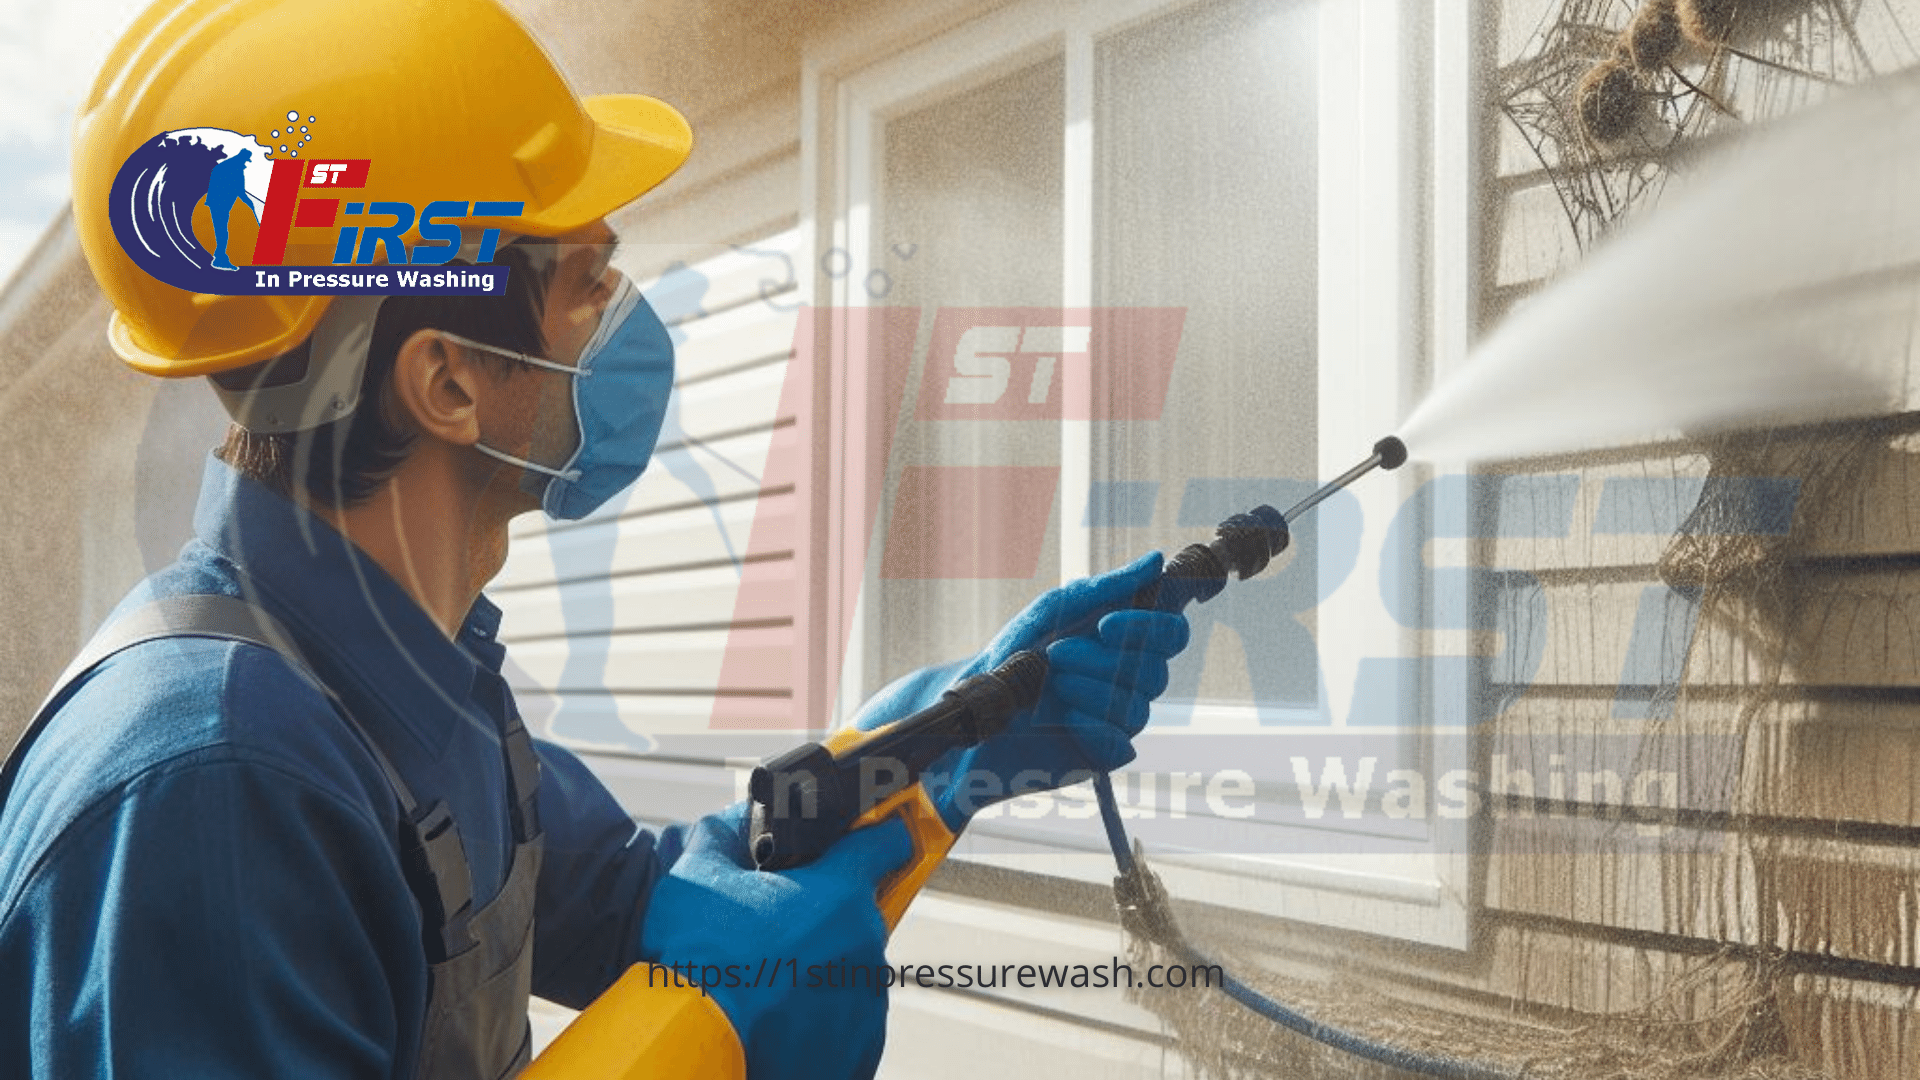 A man doing pressure washing service technician is cleaning the exterior of a house with a high-pressure water jet. The house is covered in dirt, grime, and cobwebs. The technician is wearing a blue uniform and a yellow hard hat. The sun is shining brightly in the sky.
Regular Pressure Washing.
